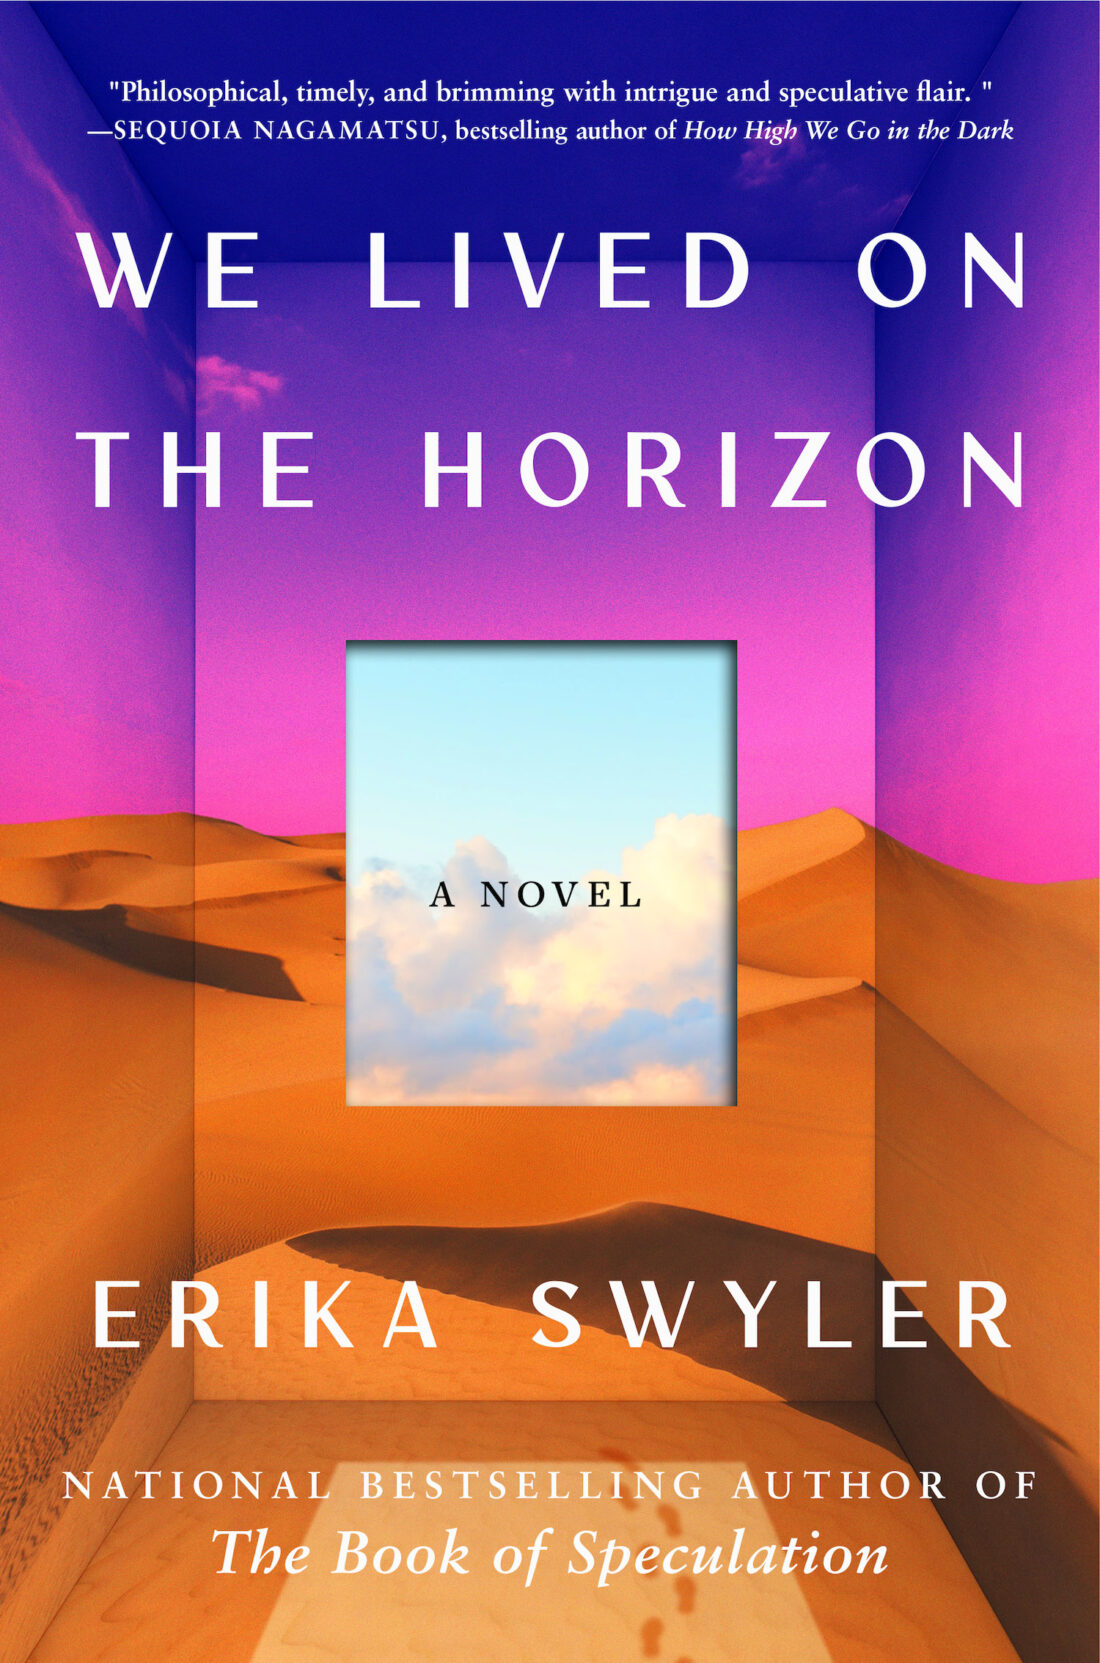 Cover of We Lived on the Horizon by Erika Swyler